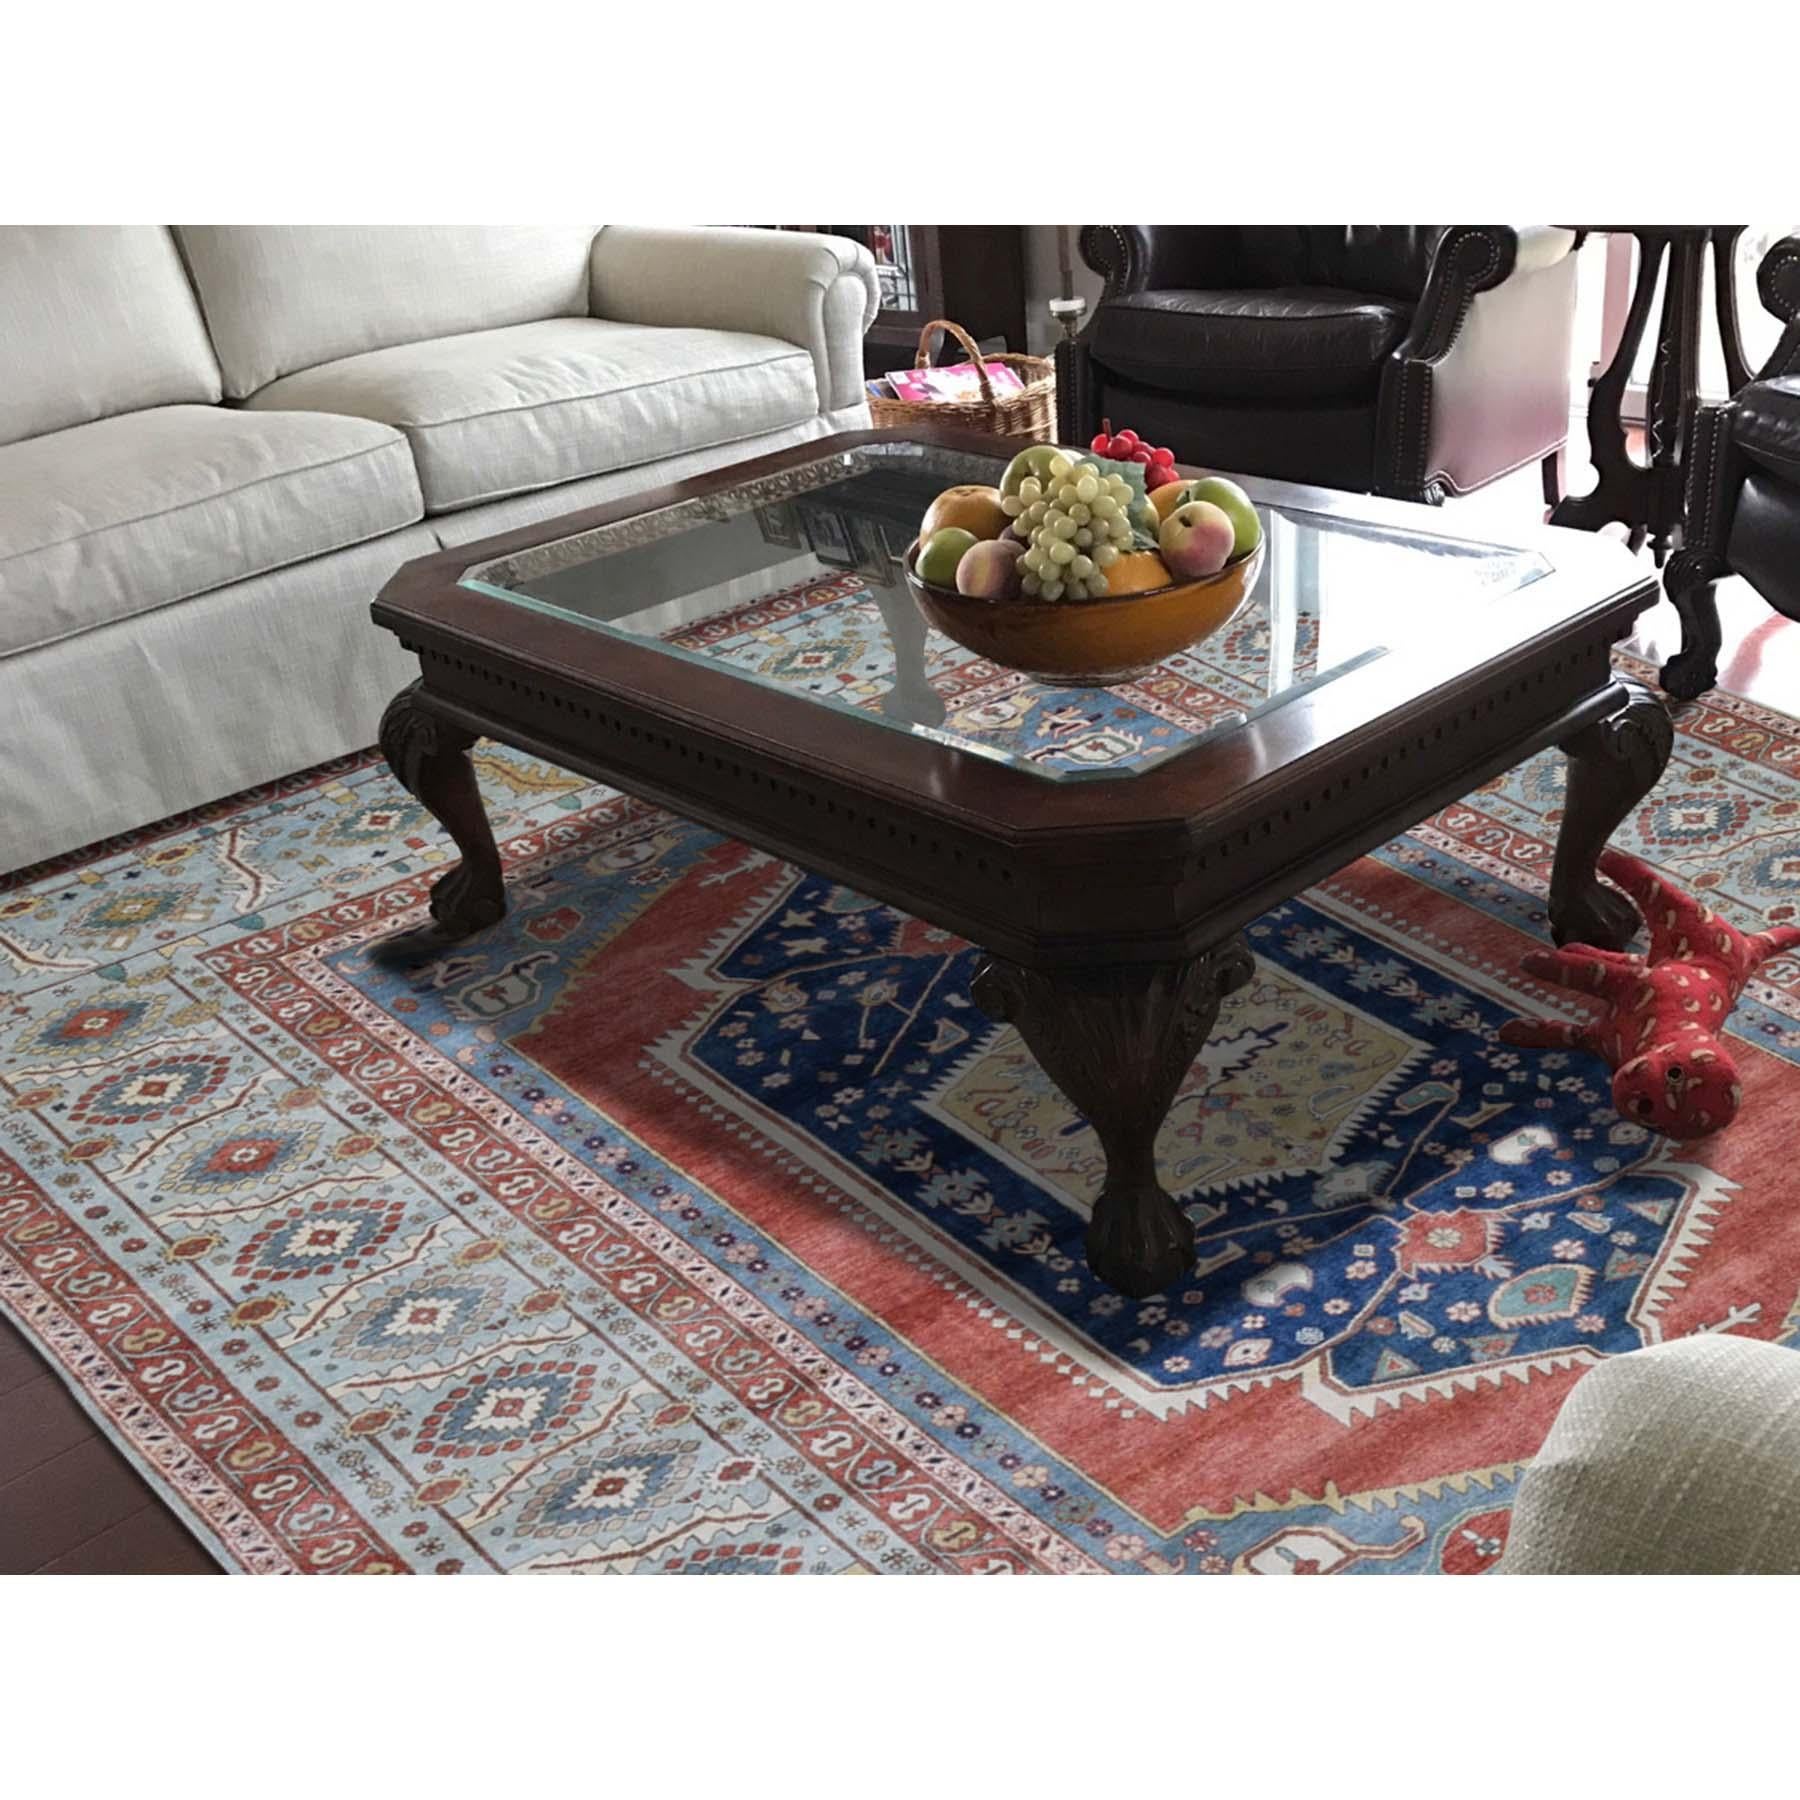 This is a truly genuine one-of-a-kind hand knotted antiqued Bakshaish re-creation pure wool Oriental rug. It has been knotted for months and months in the centuries-old Persian weaving craftsmanship techniques by expert artisans. Measures: 7'10